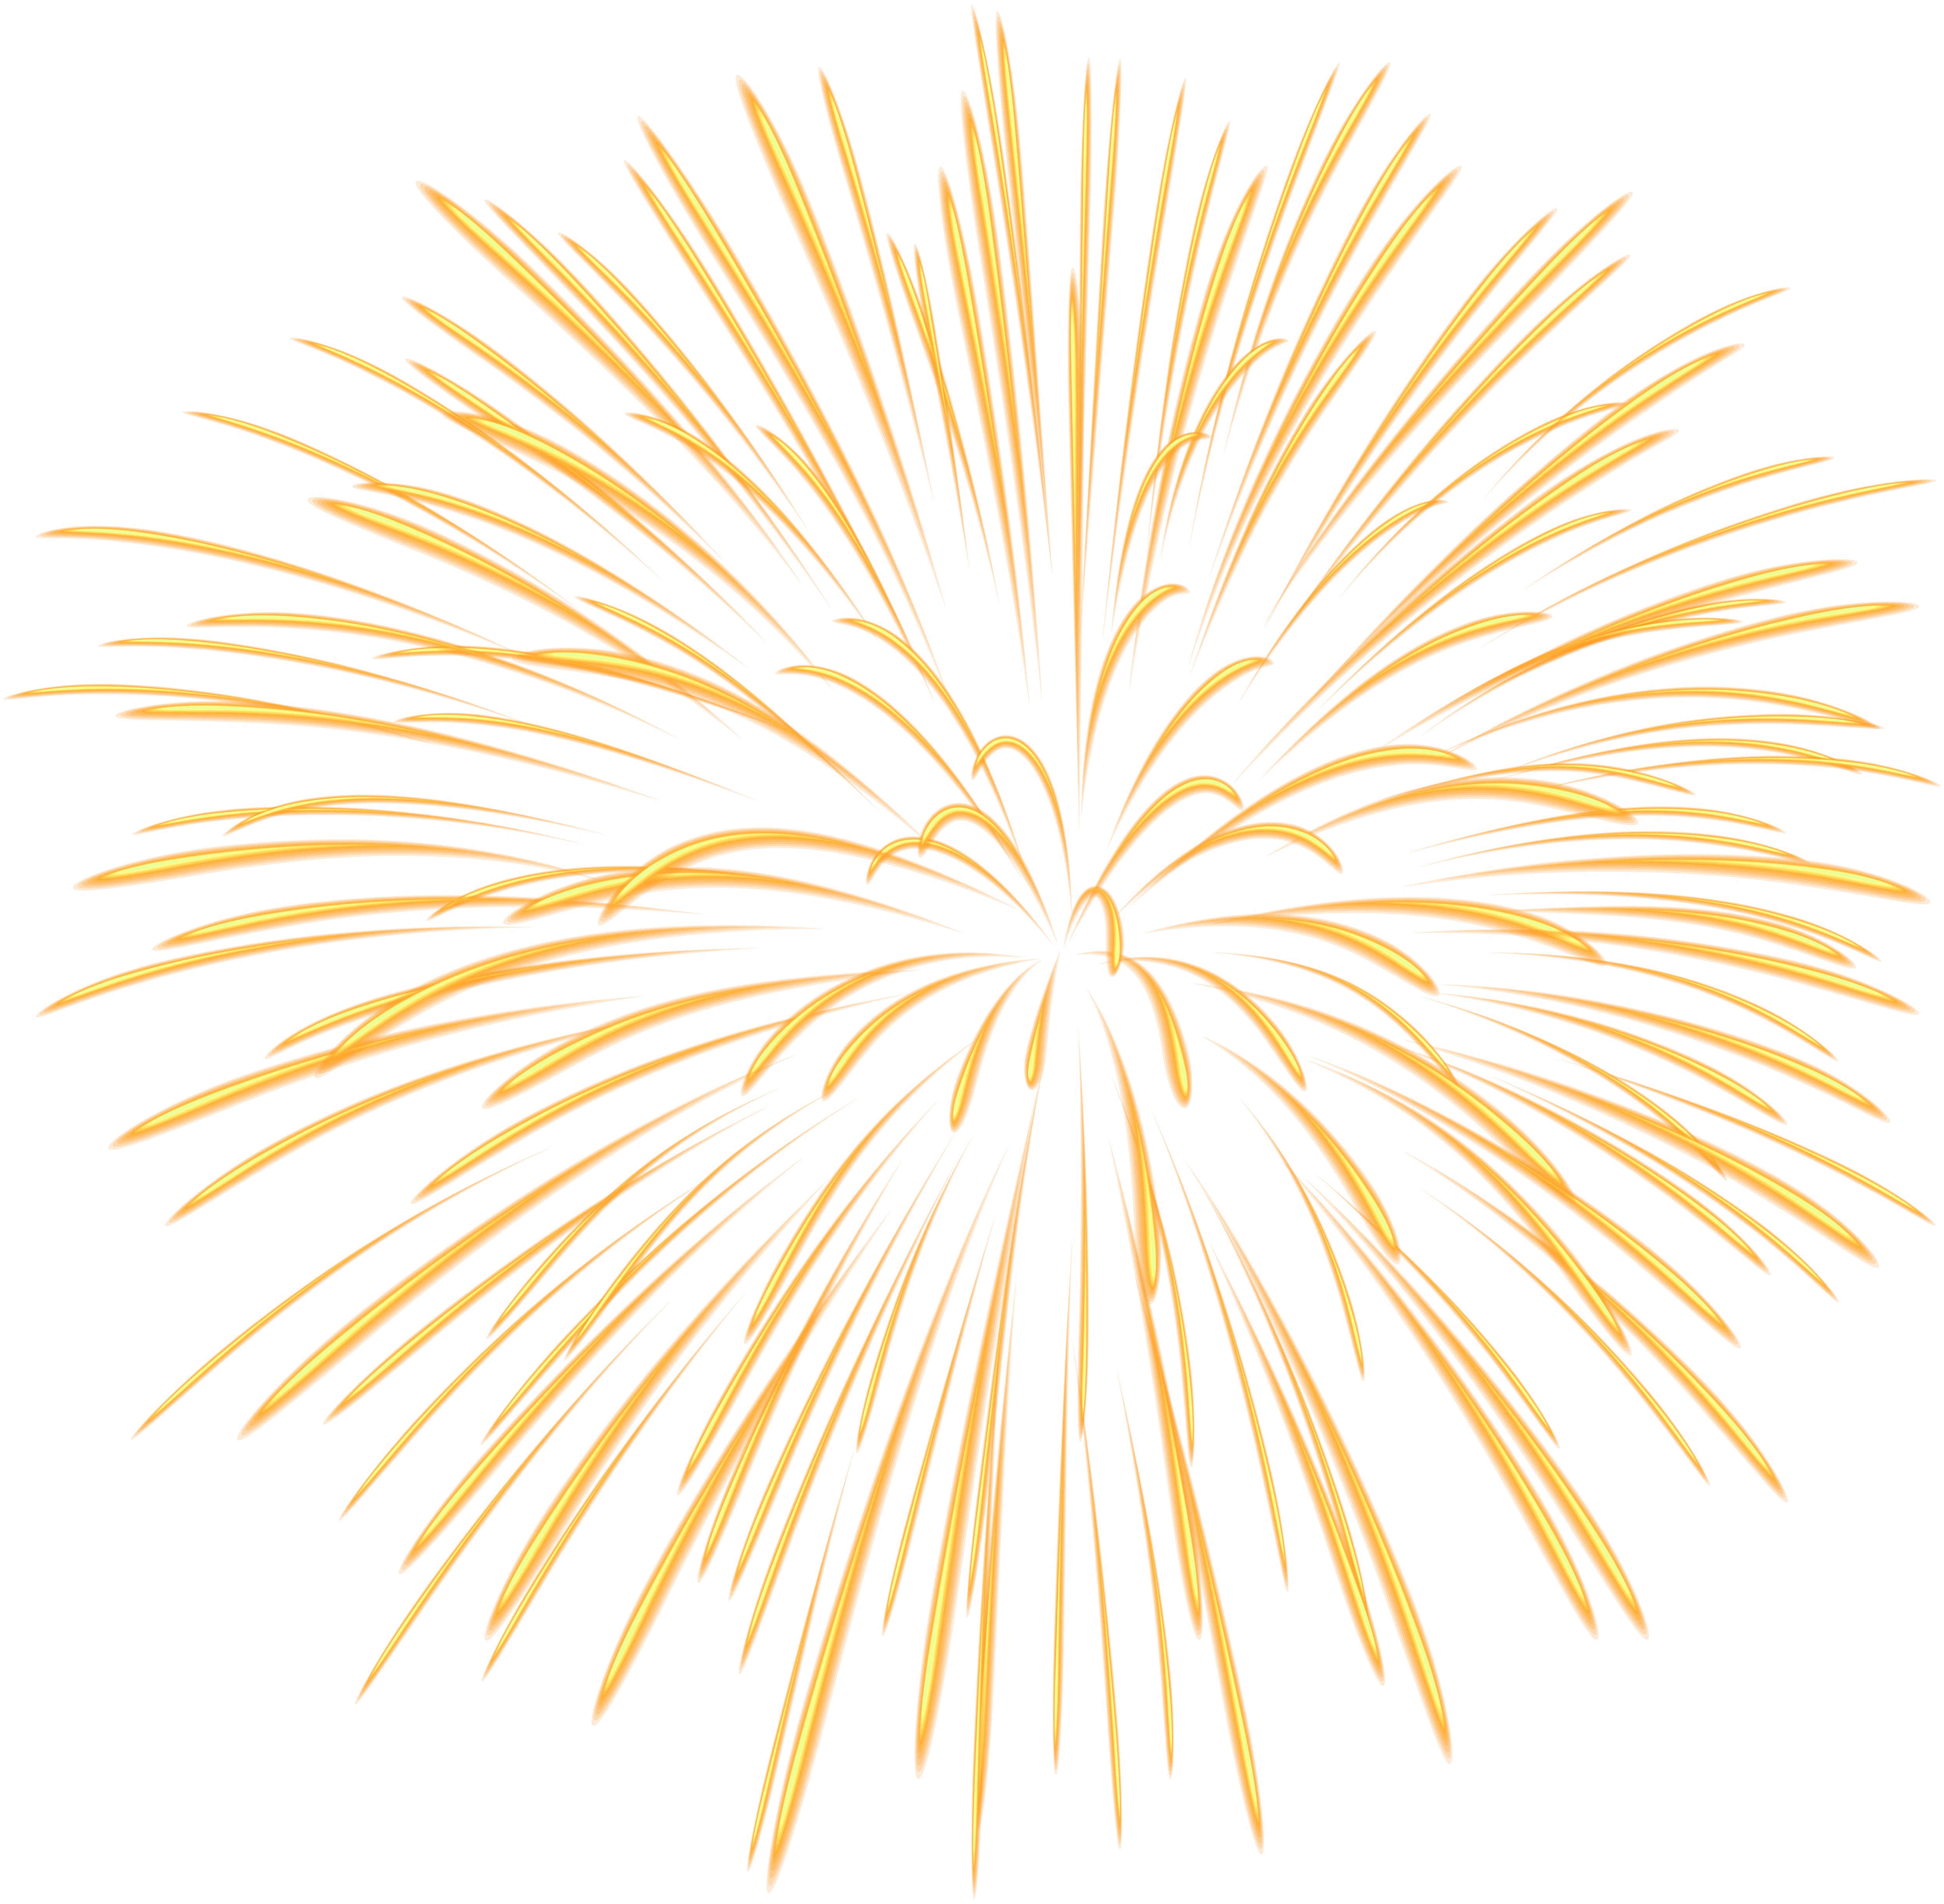 fireworks clipart yellow pencil and color fireworks #10330